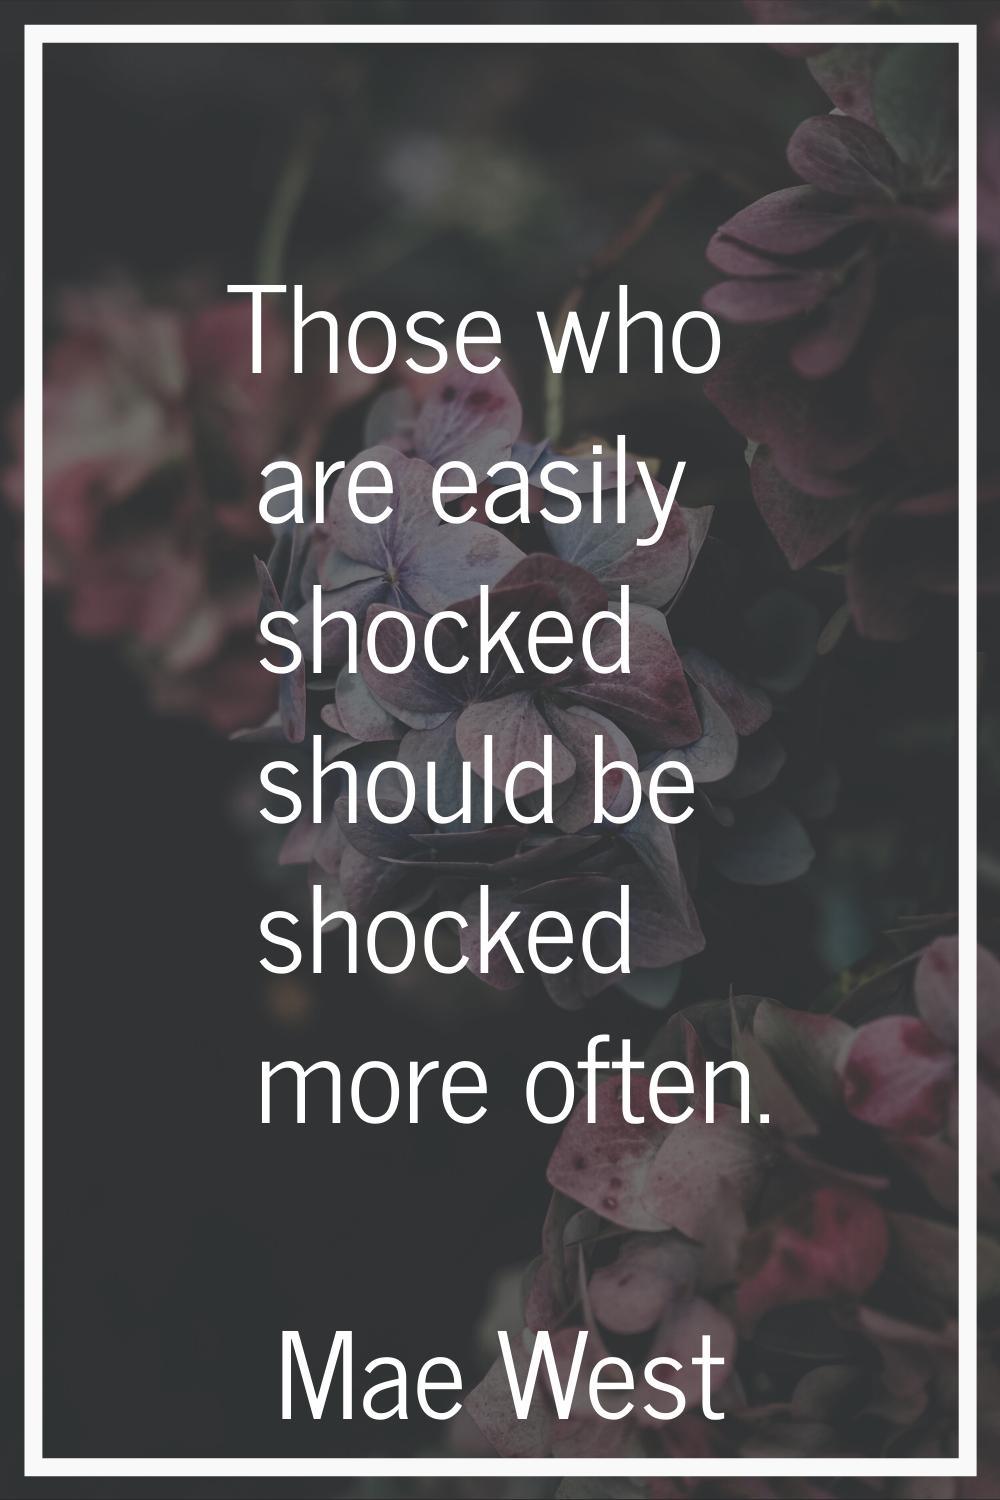 Those who are easily shocked should be shocked more often.